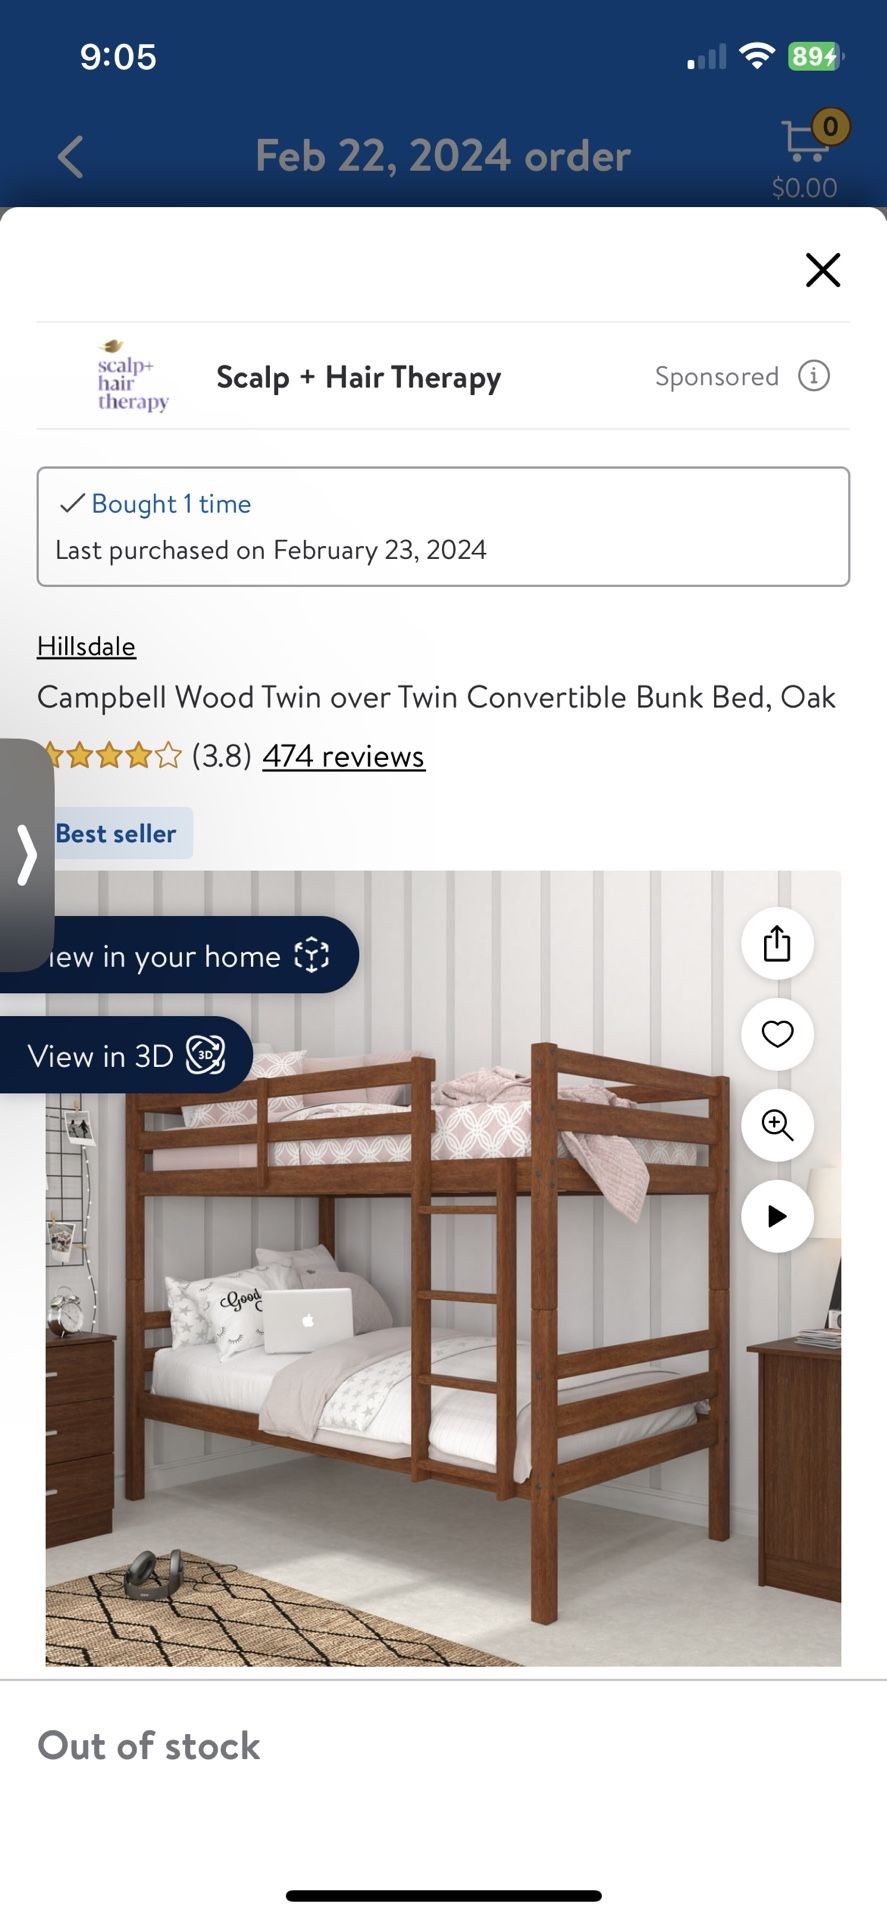 Campbell Wood Twin over Twin Convertible Bunk Bed, Oak